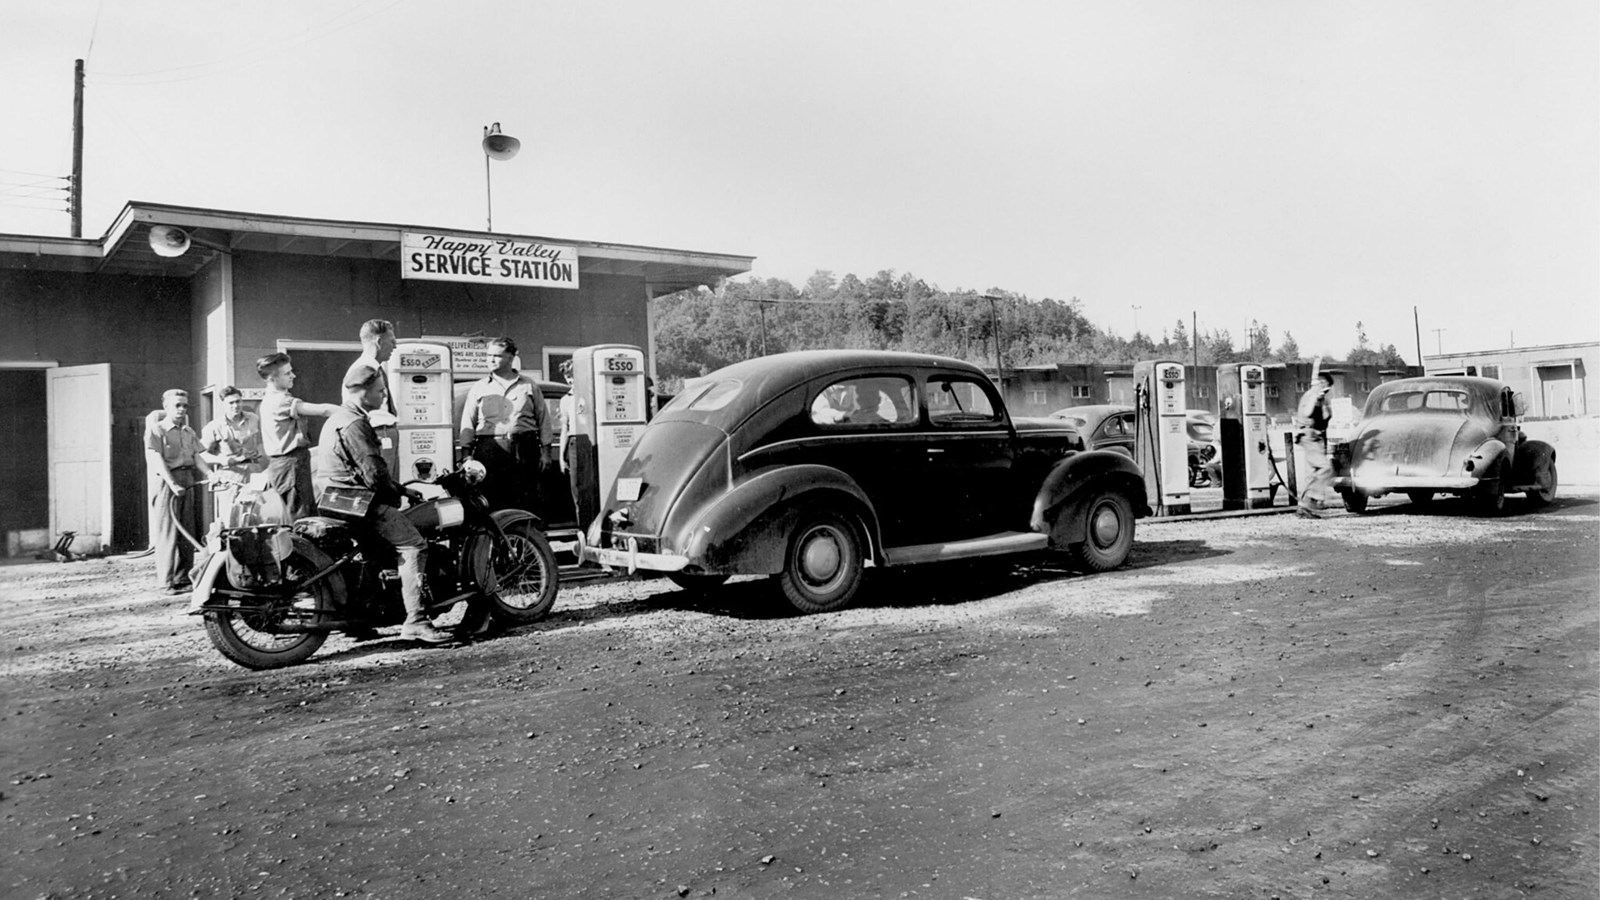 A small service station surrounded by people, cars, and motorcycles